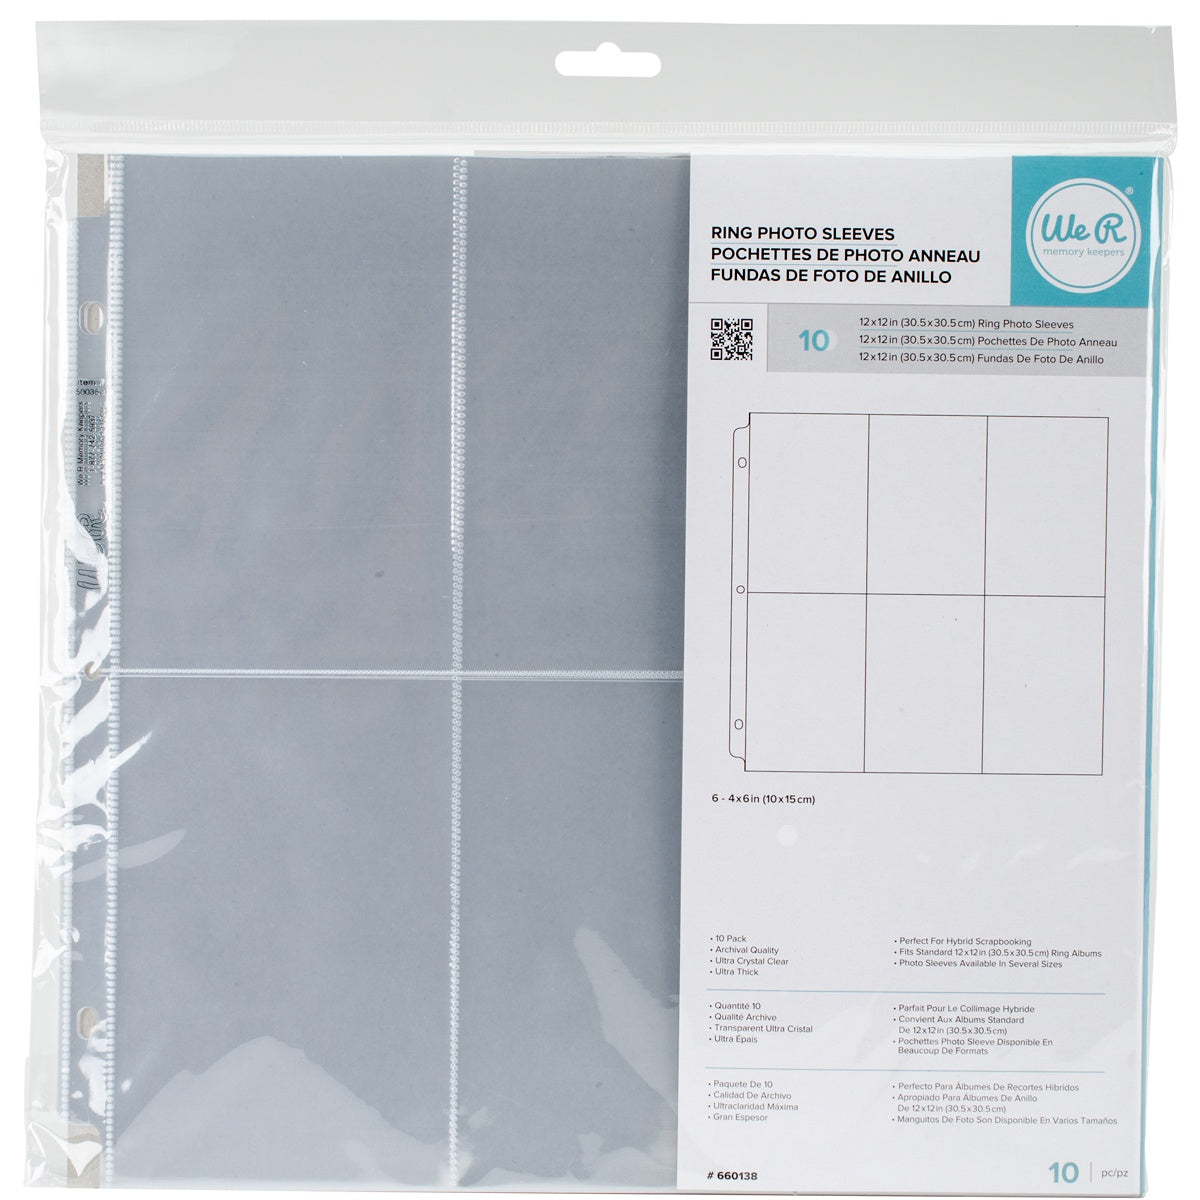 Multipack of 8 - We R Ring Photo Sleeves 12"X12" 10/Pkg-(6) 6"X4" Pockets